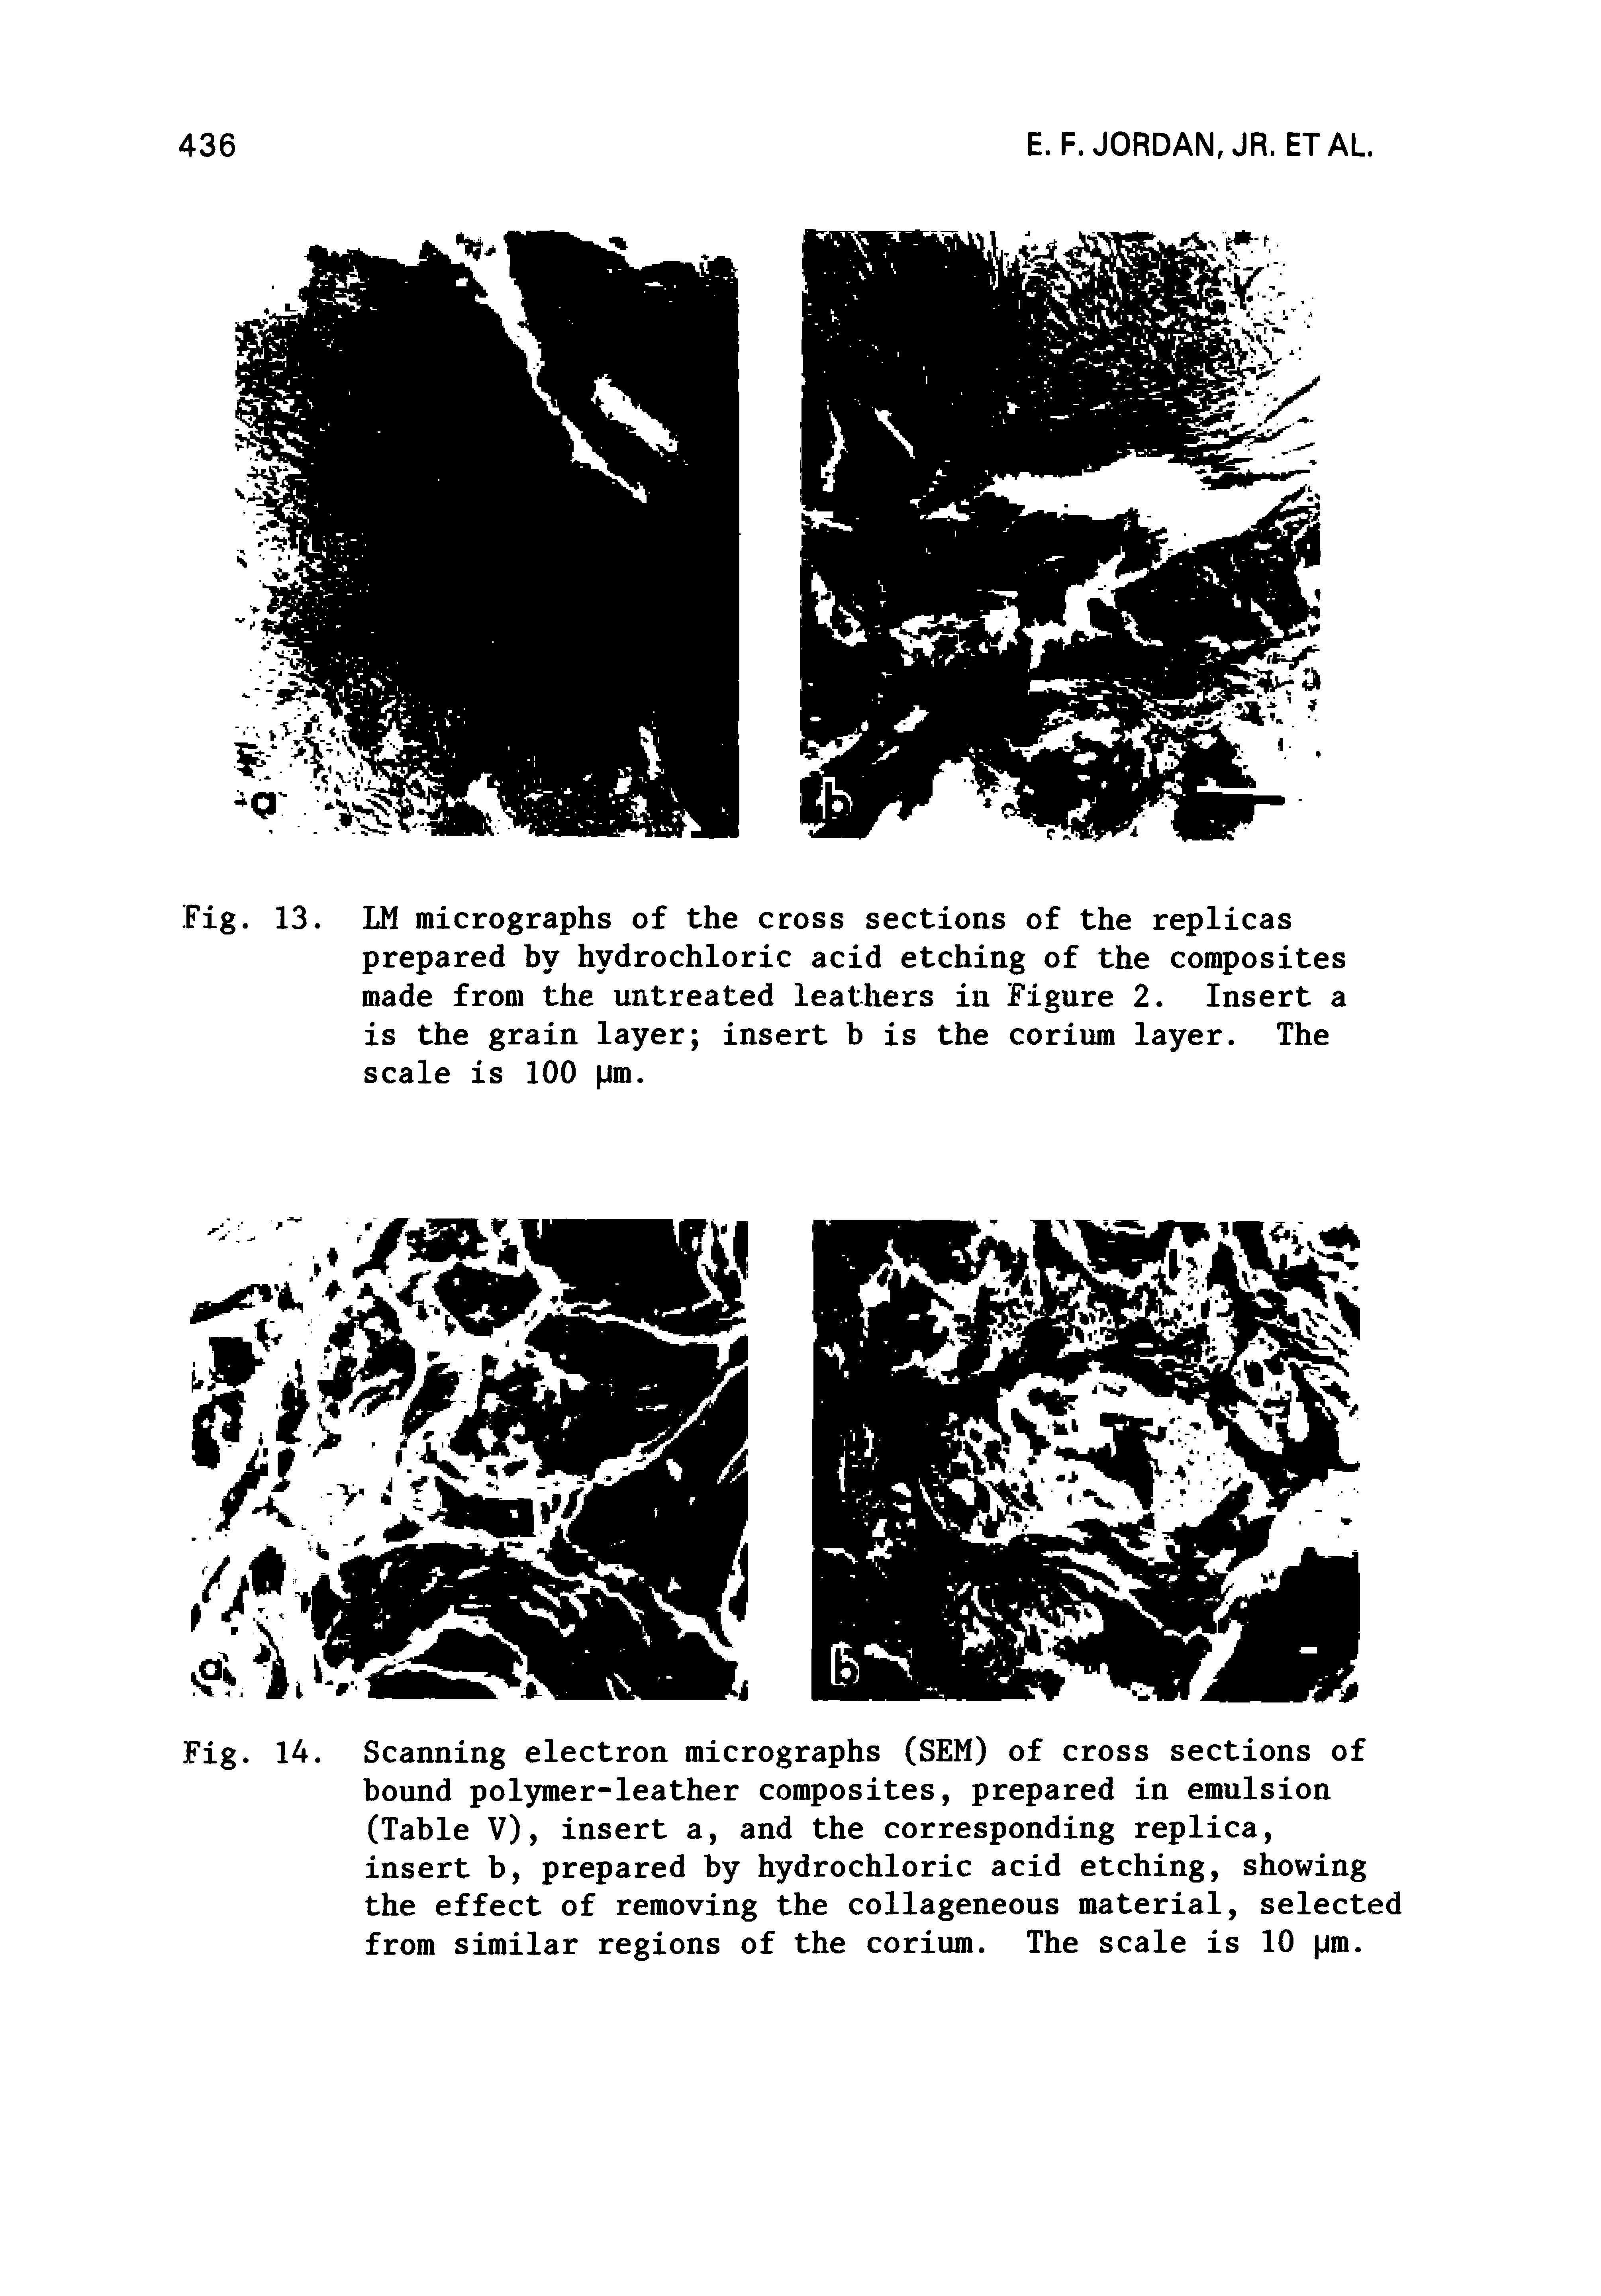 Fig. 14. Scanning electron micrographs (SEM) of cross sections of bound polymer-leather composites, prepared in emulsion (Table V), insert a, and the corresponding replica, insert b, prepared by hydrochloric acid etching, showing the effect of removing the collageneous material, selected from similar regions of the corium. The scale is 10 pm.